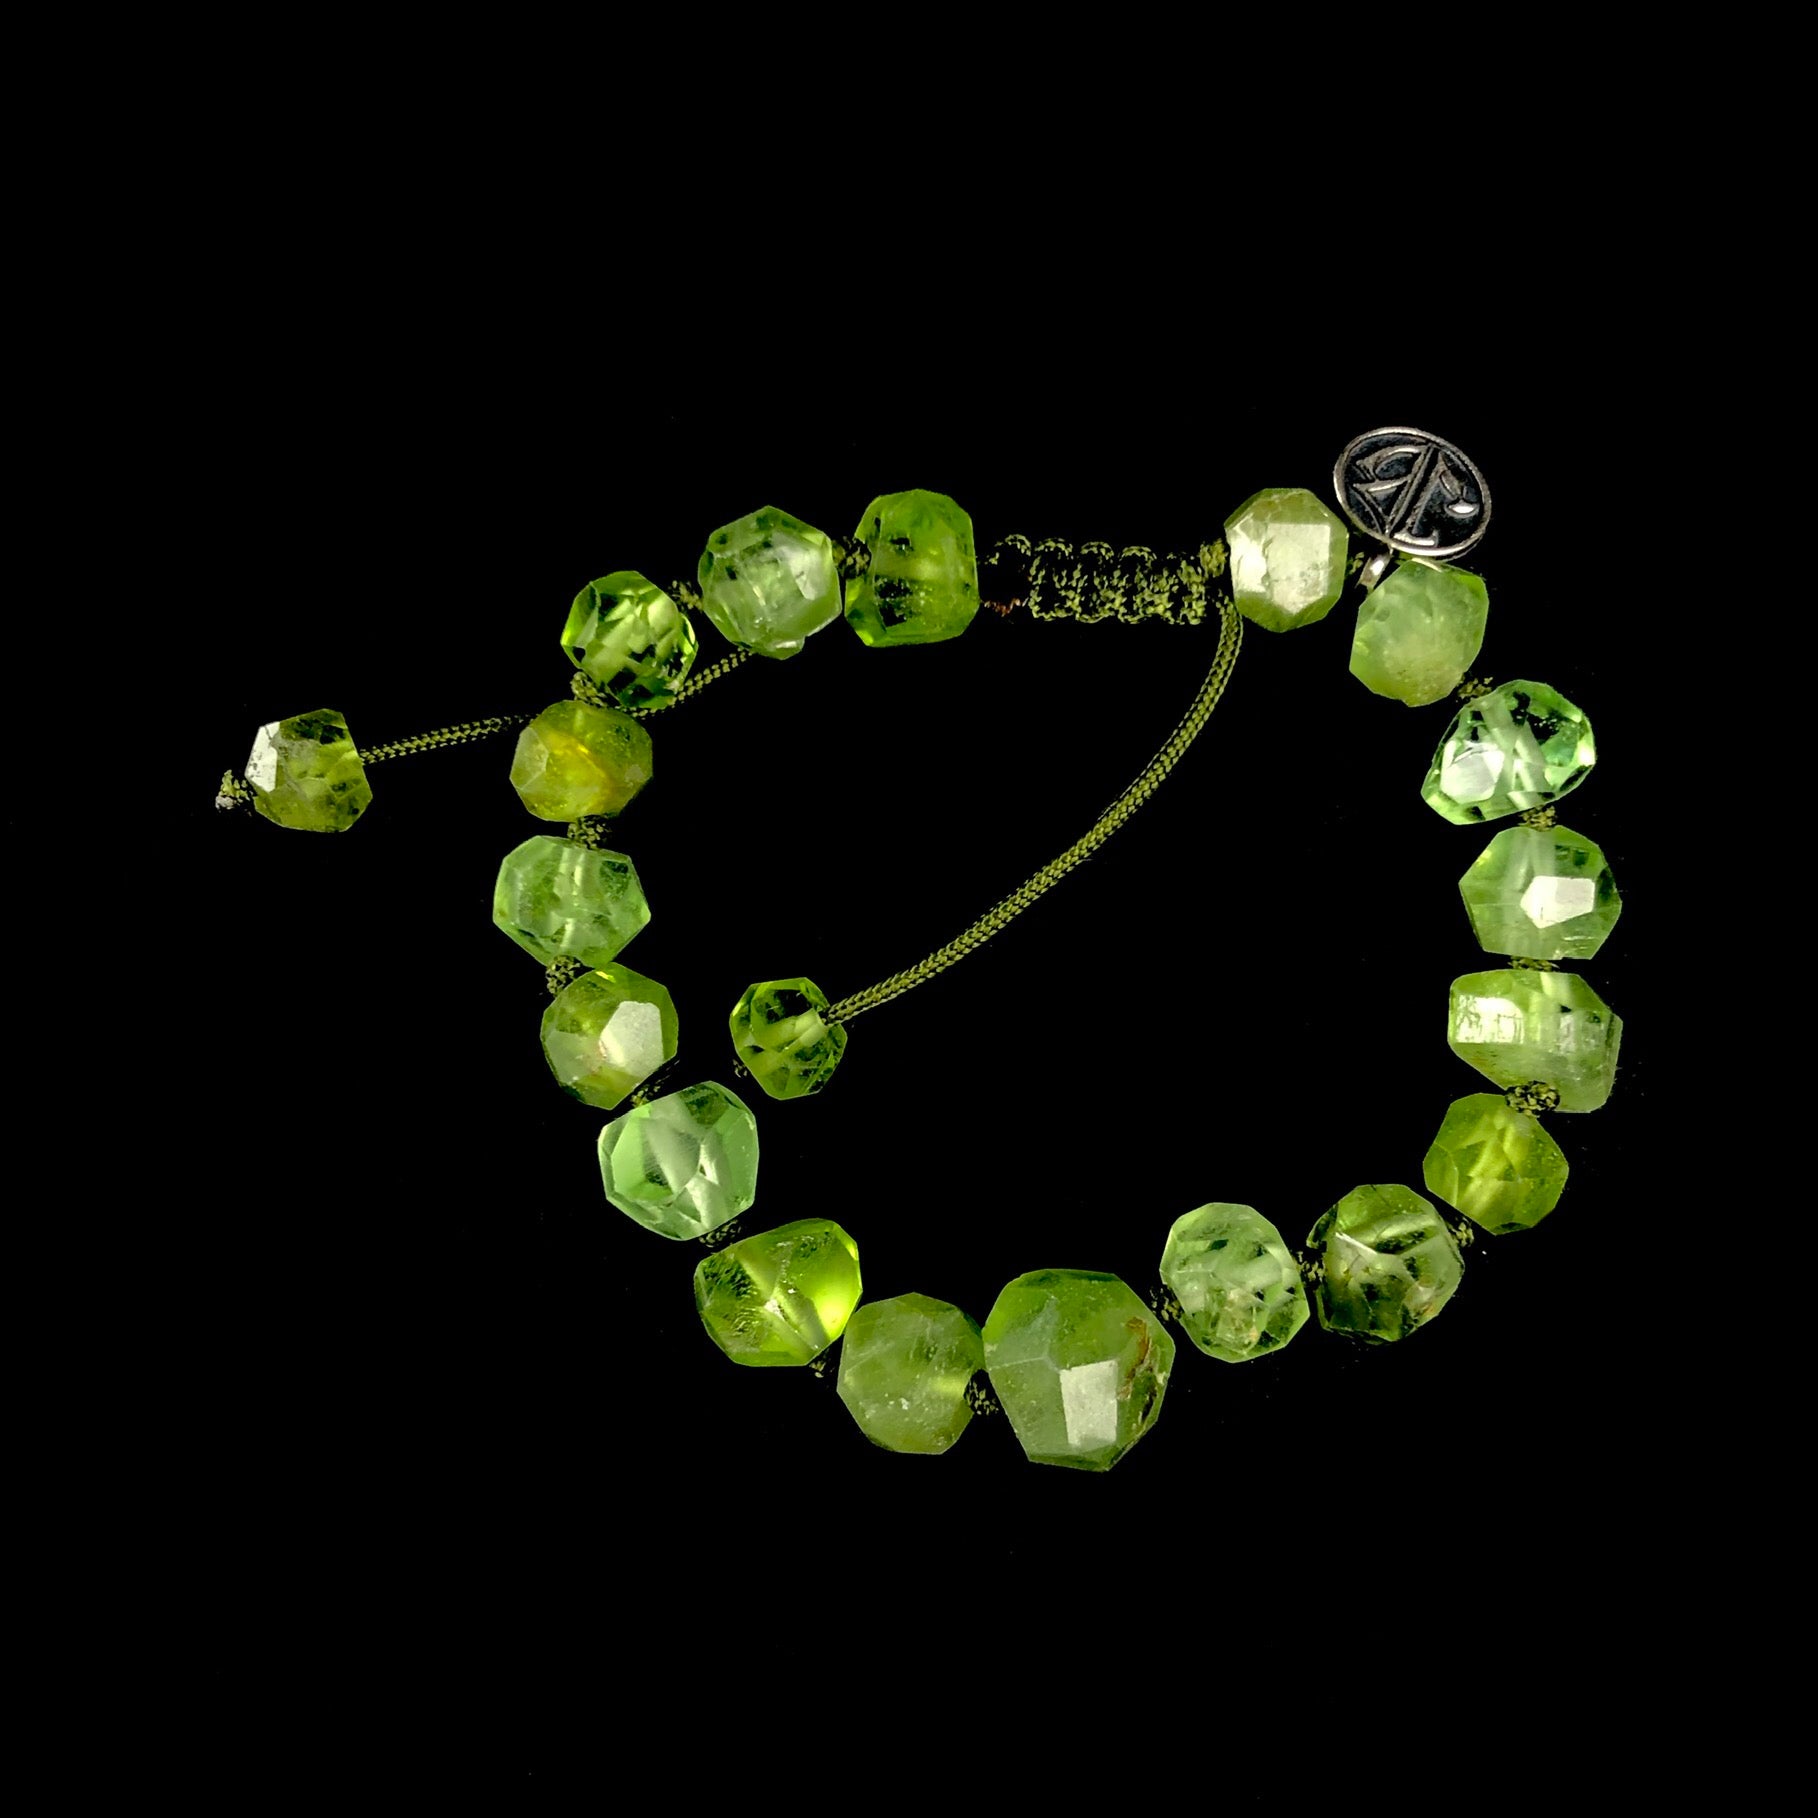 Vibrant grass green colored asymmetrically shaped stone beaded bracelet with green knotted cord 